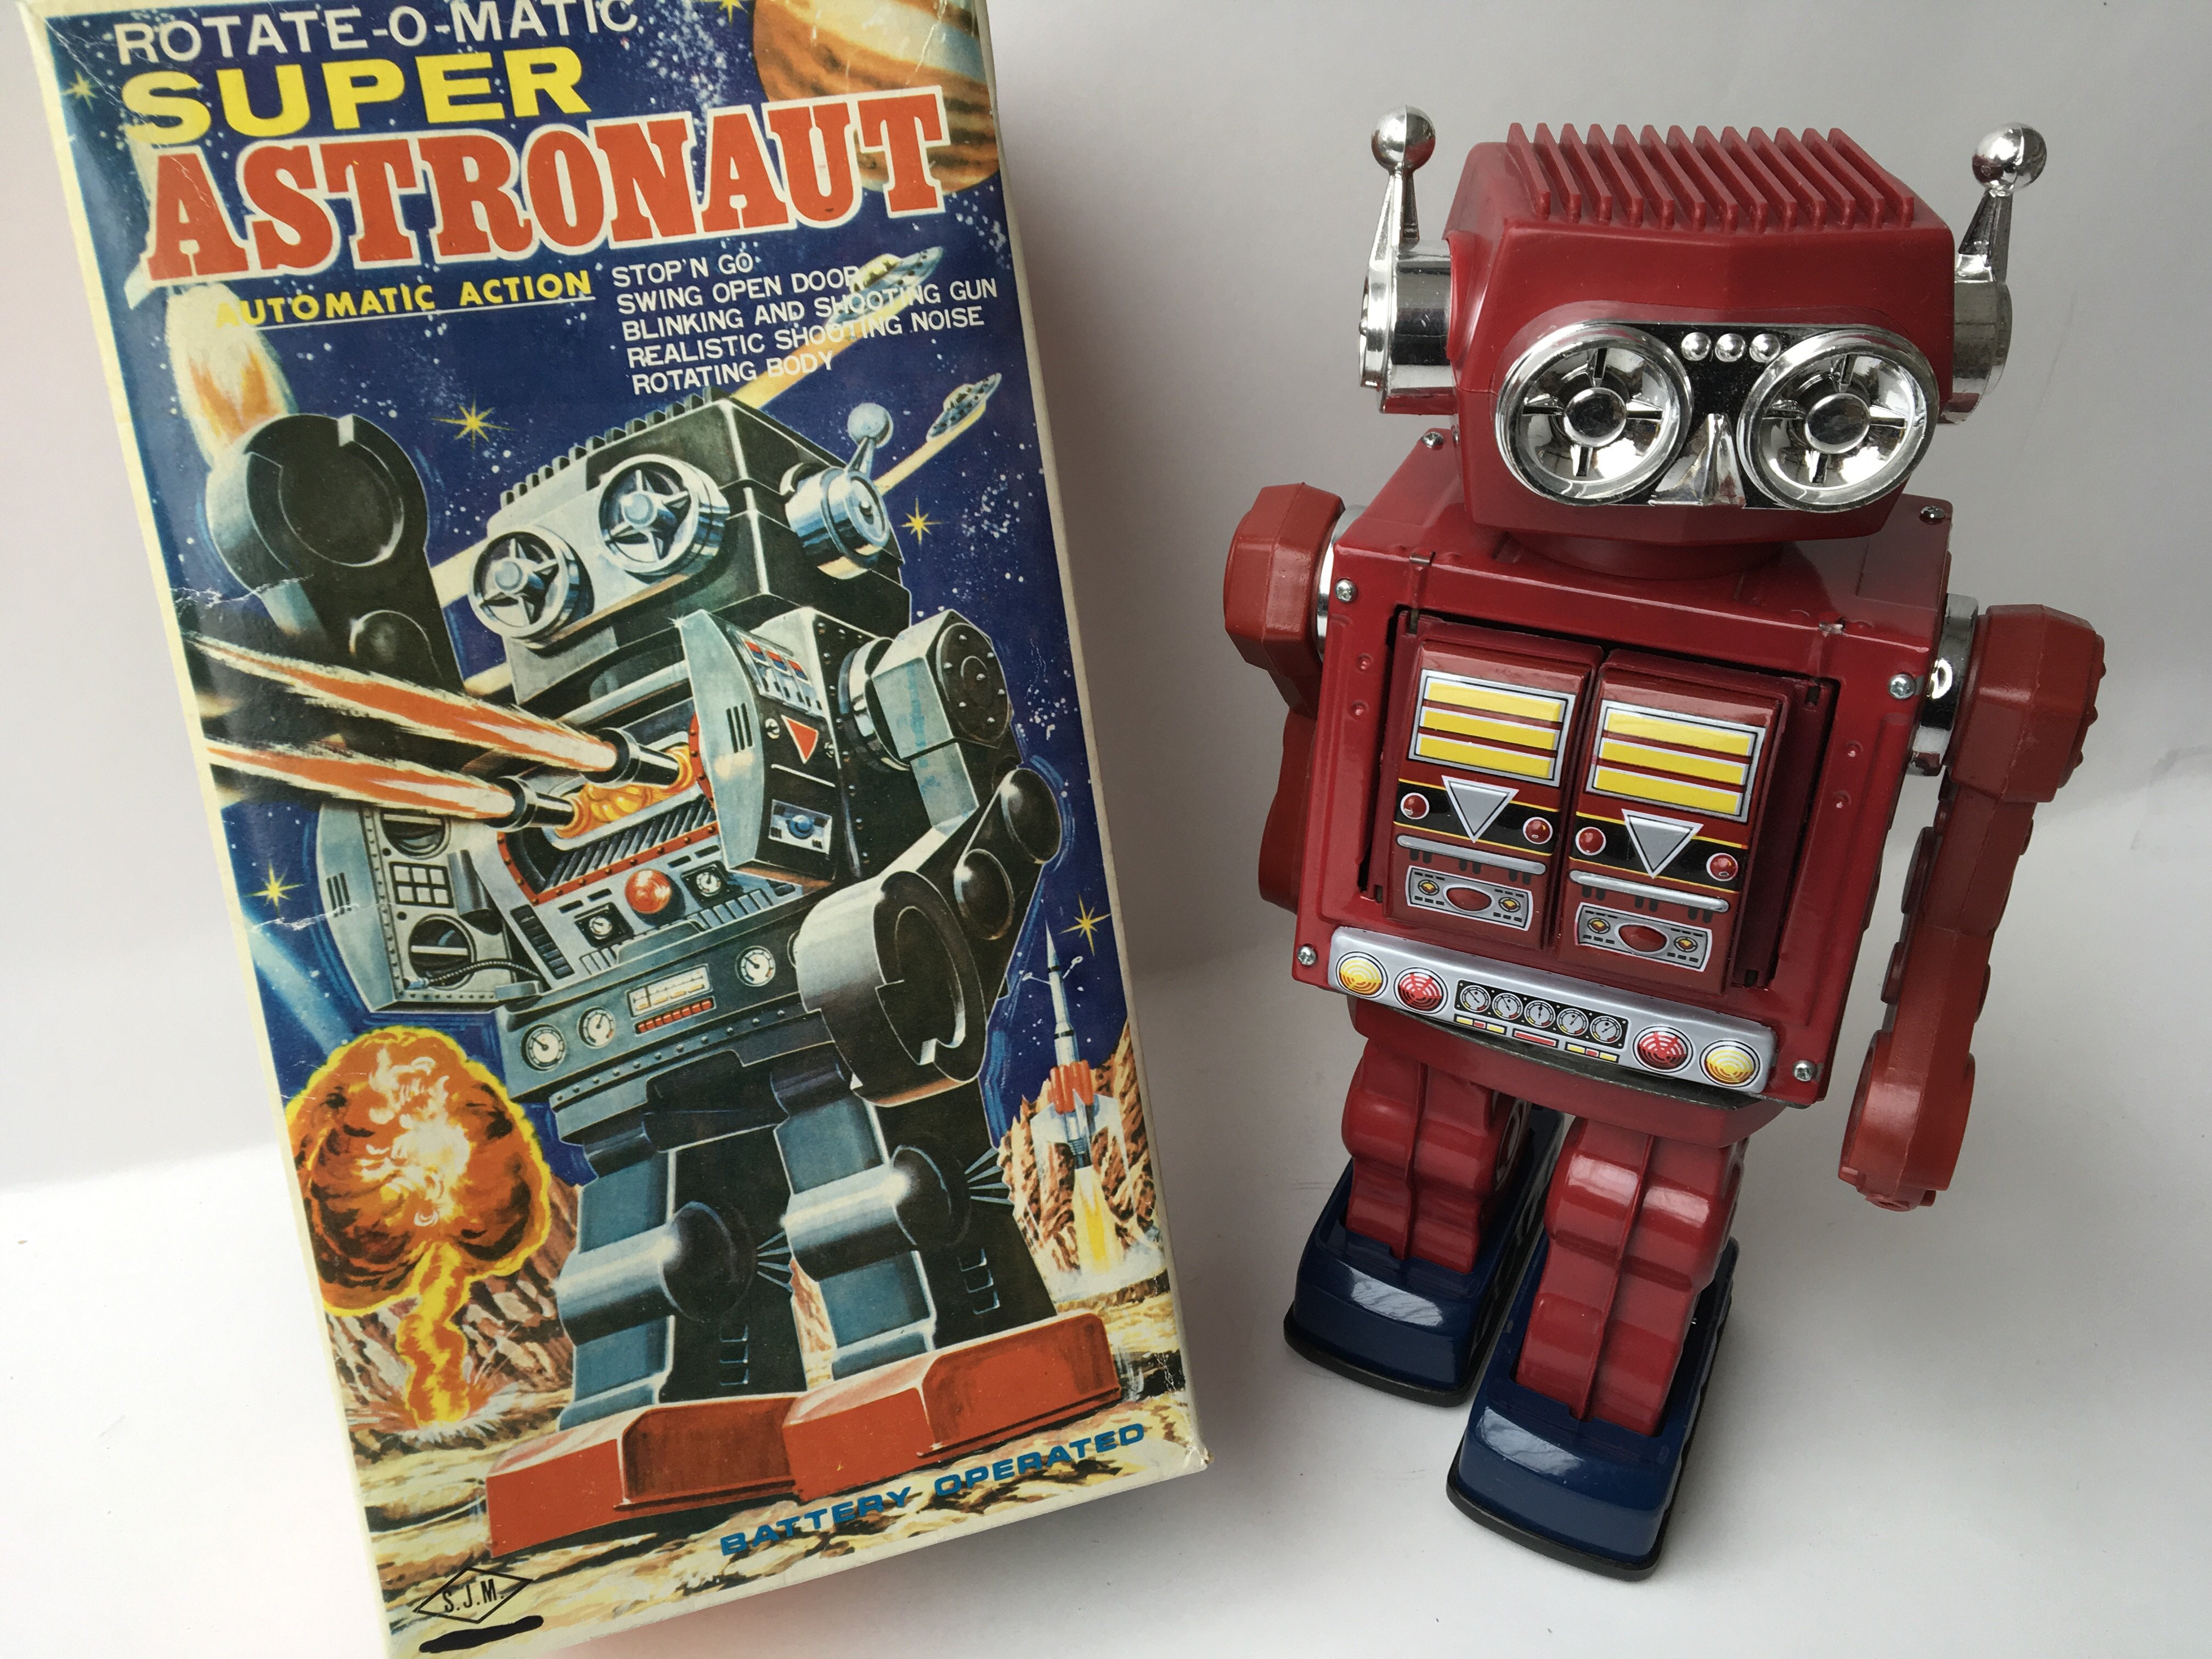 A Japanese boxed, plastic, battery operated, Rotate o matic, Super Astronaut Robot